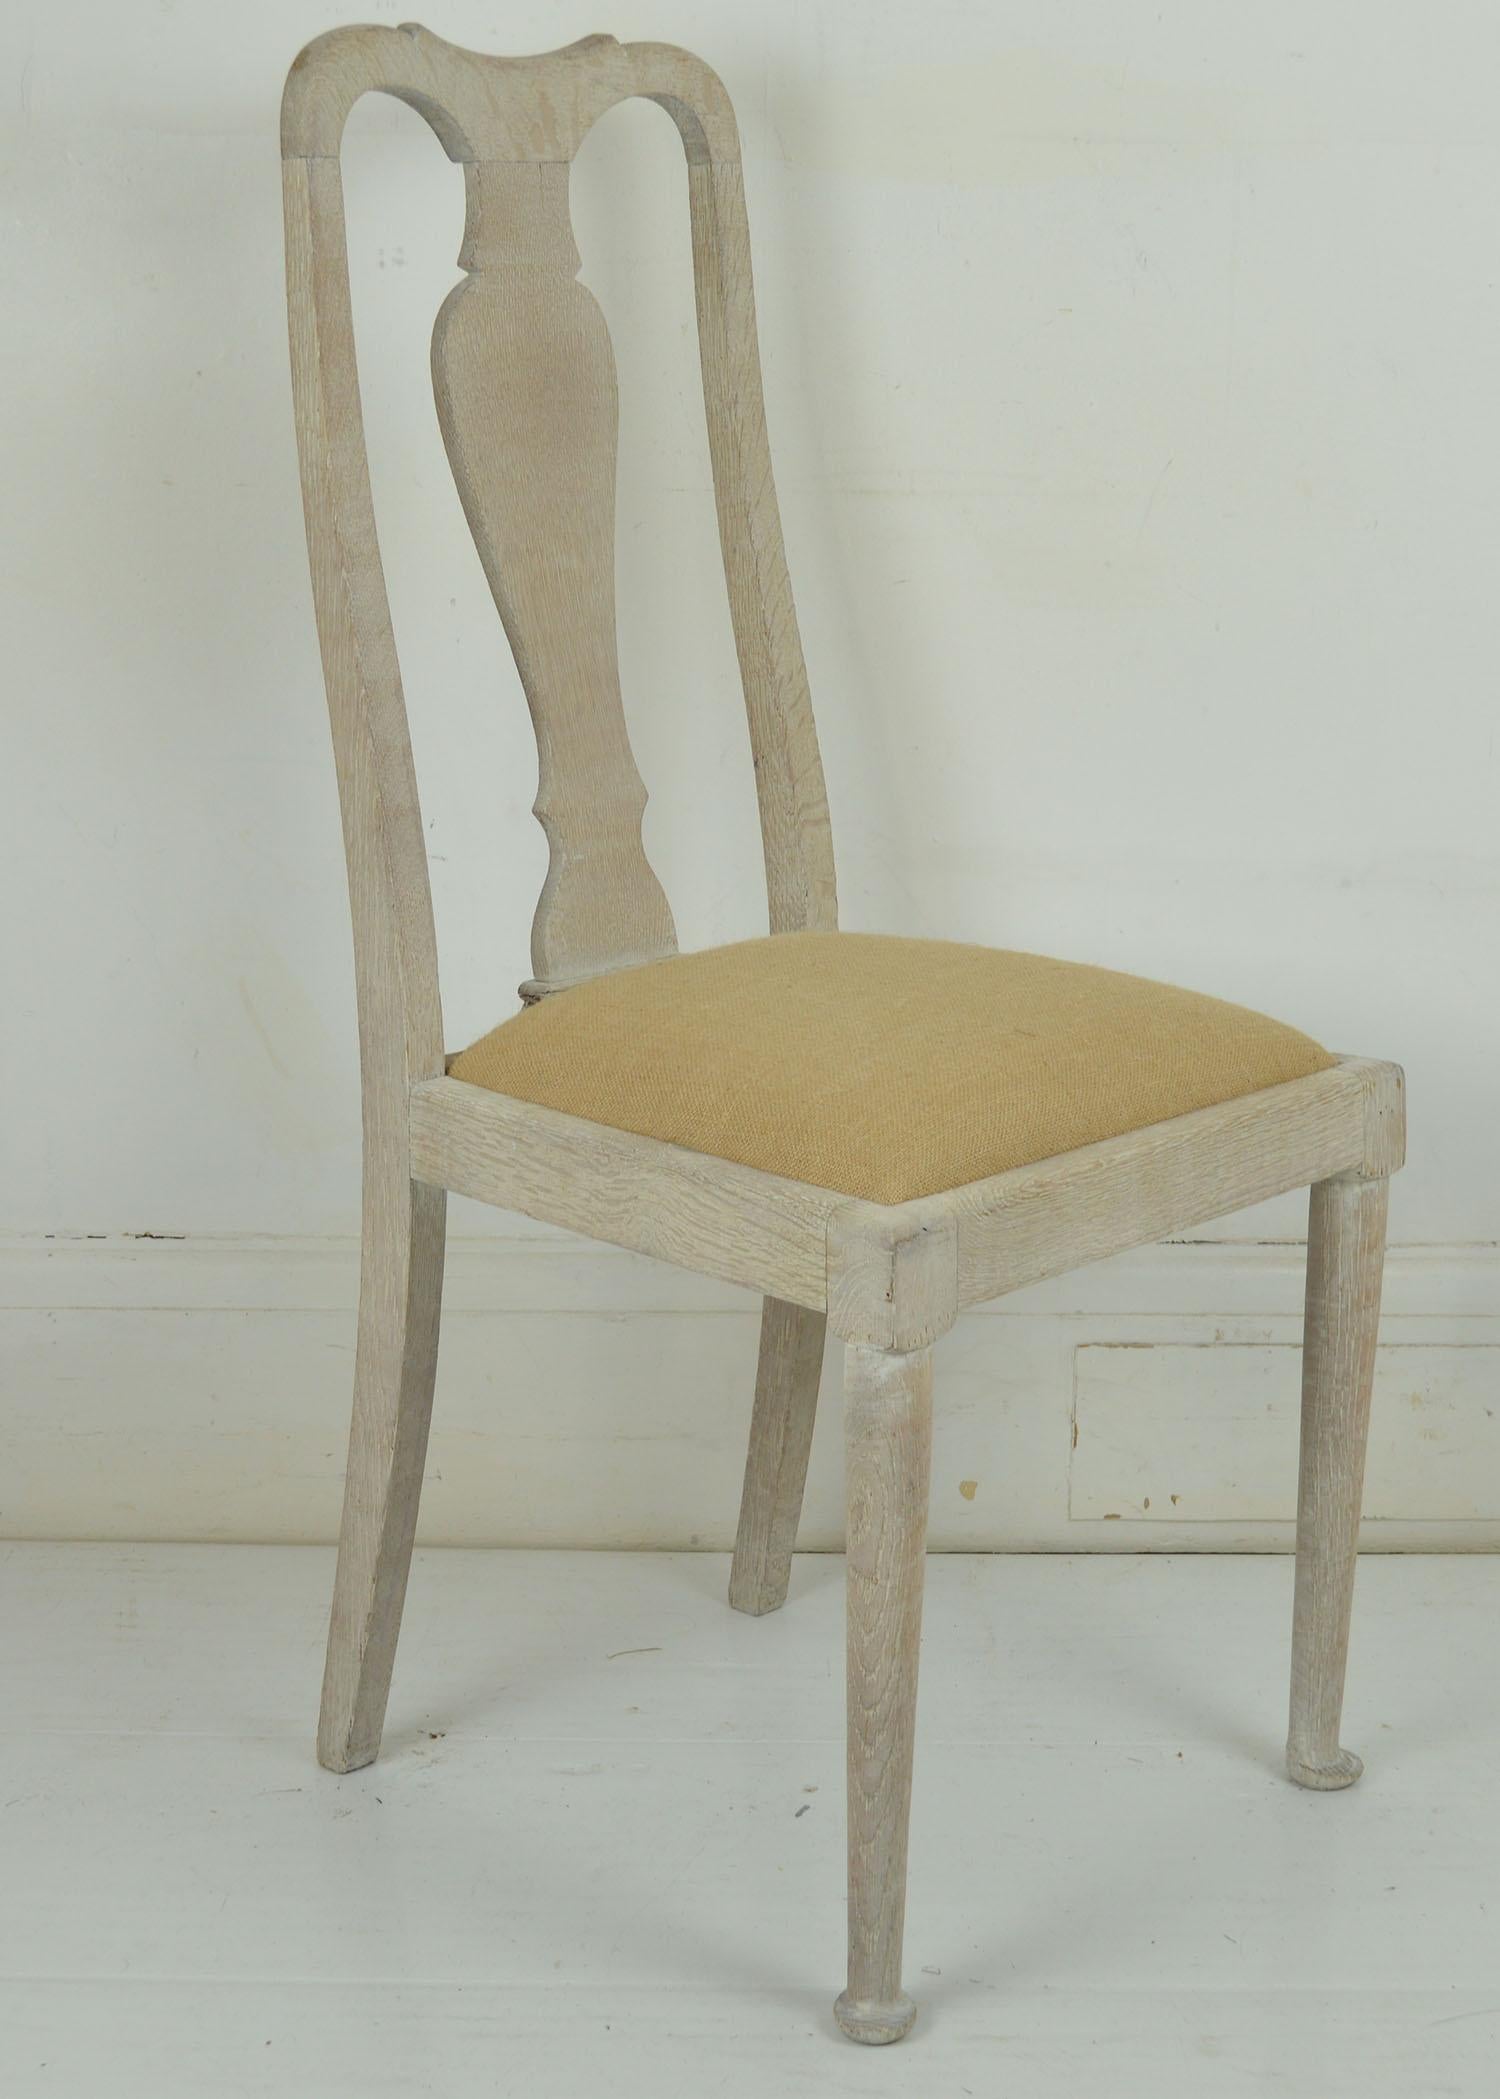 Very attractive and practical set of four dining or kitchen chairs.

These chairs are quite slim so good for a smaller table.

I particularly like the austerity of the abbreviated front Queen Anne leg

They have been recently bleached and